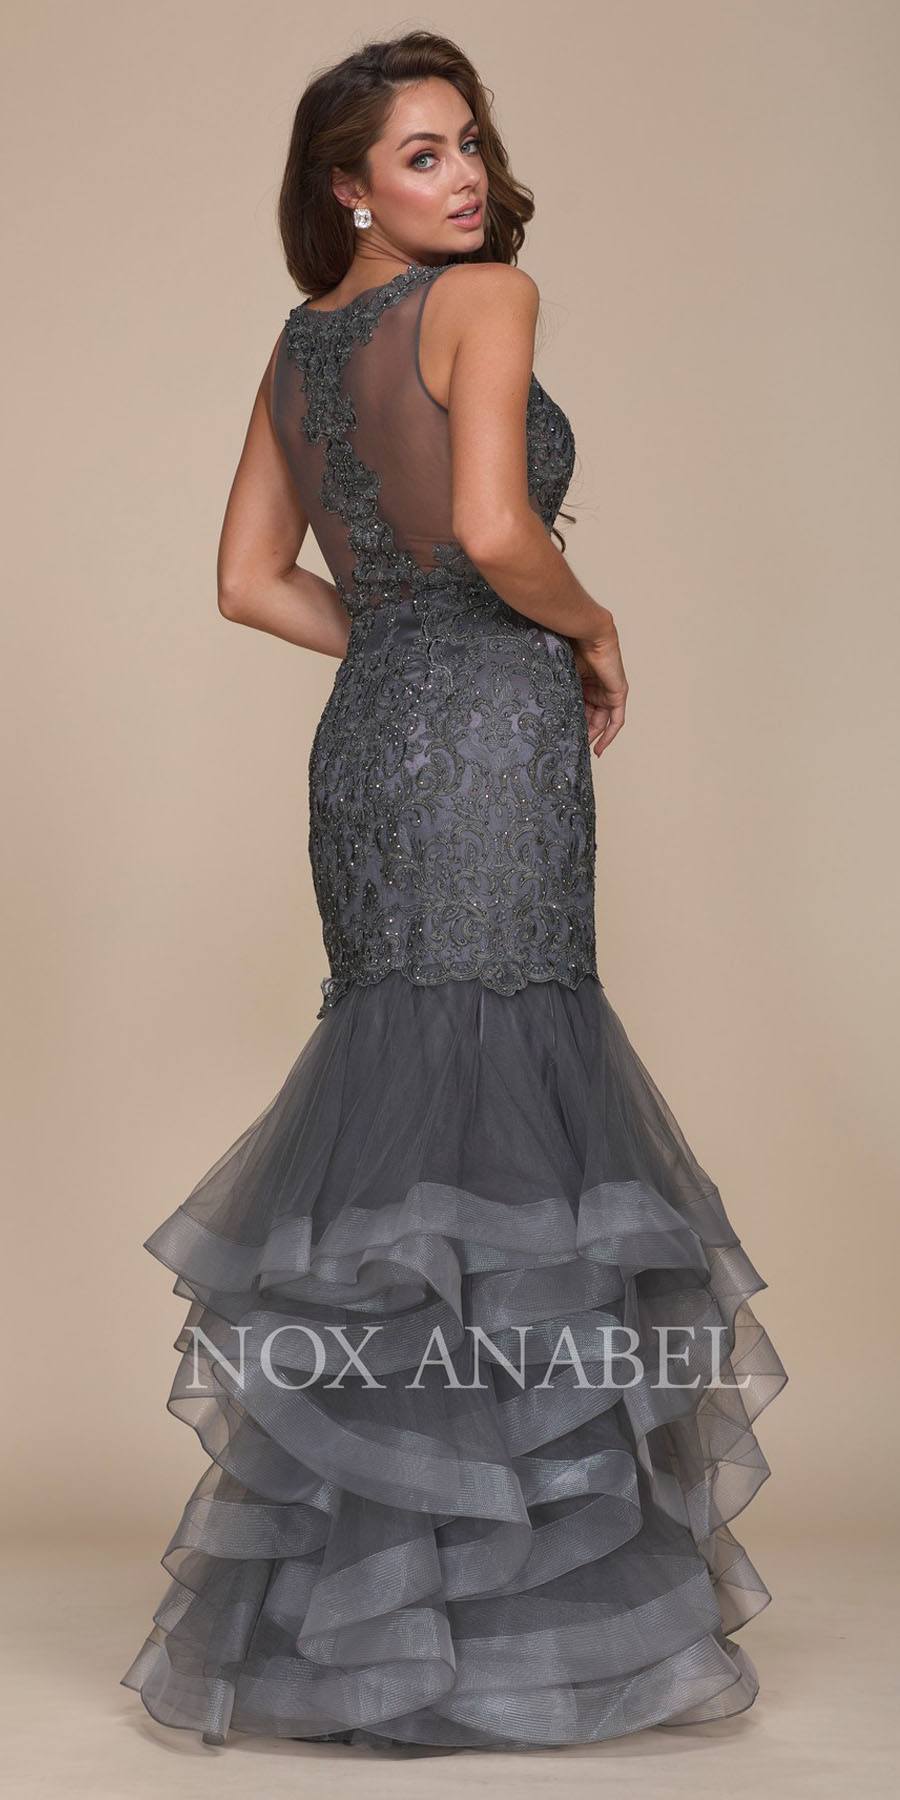 Steel Tiered Mermaid Prom Gown Illusion Back V-Neck 